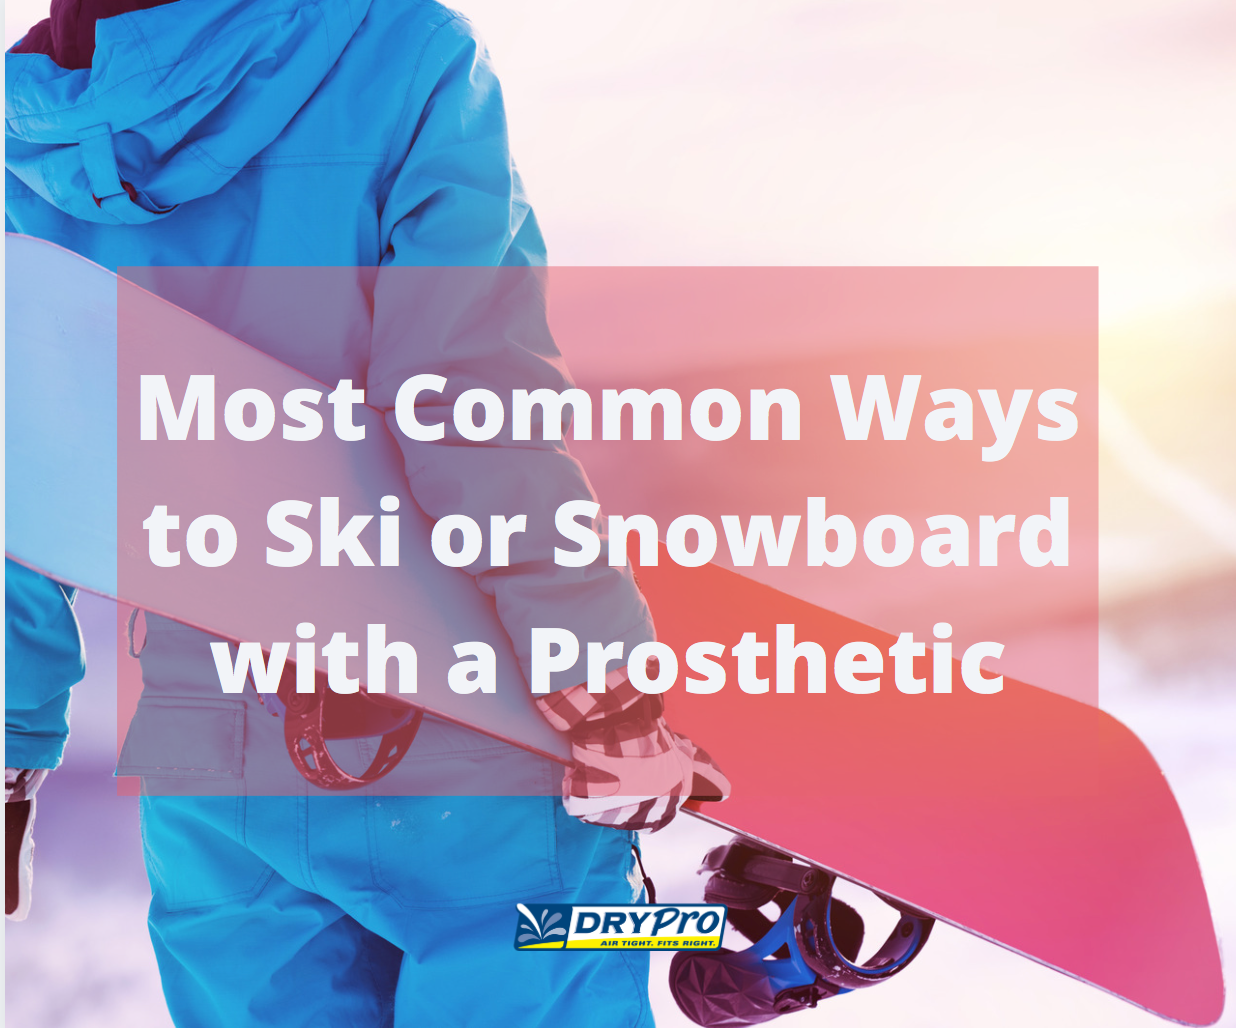 Most Common Ways to Ski or Snowboard with a Prosthetic